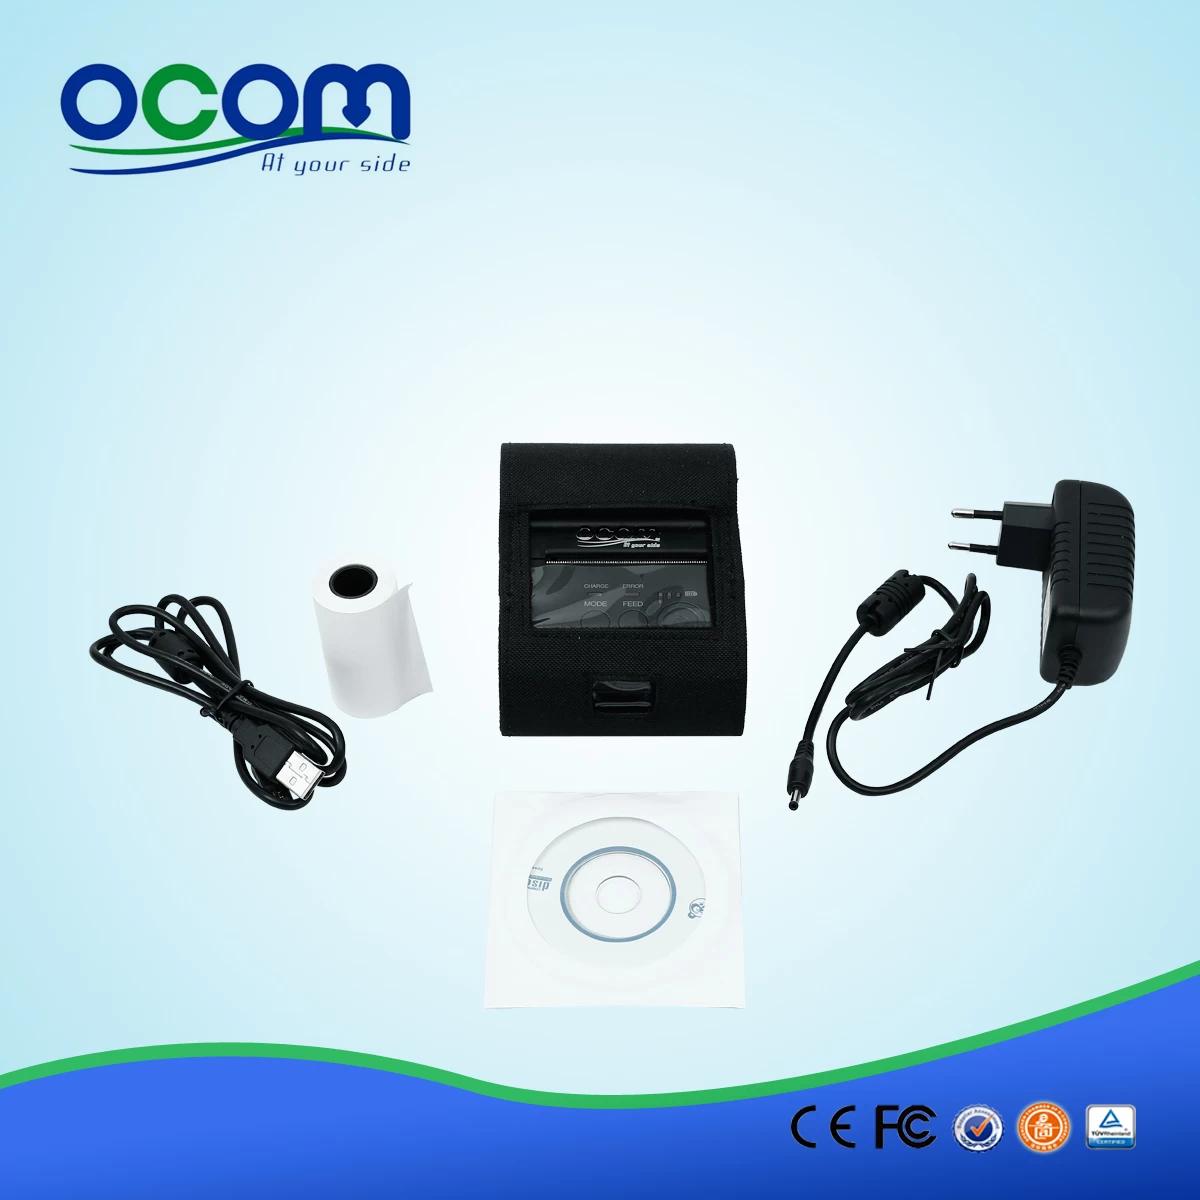 Bluetooth POS Printer Android Support Thermal Printer WinCE Support Printer (OCPP-M03-BB)